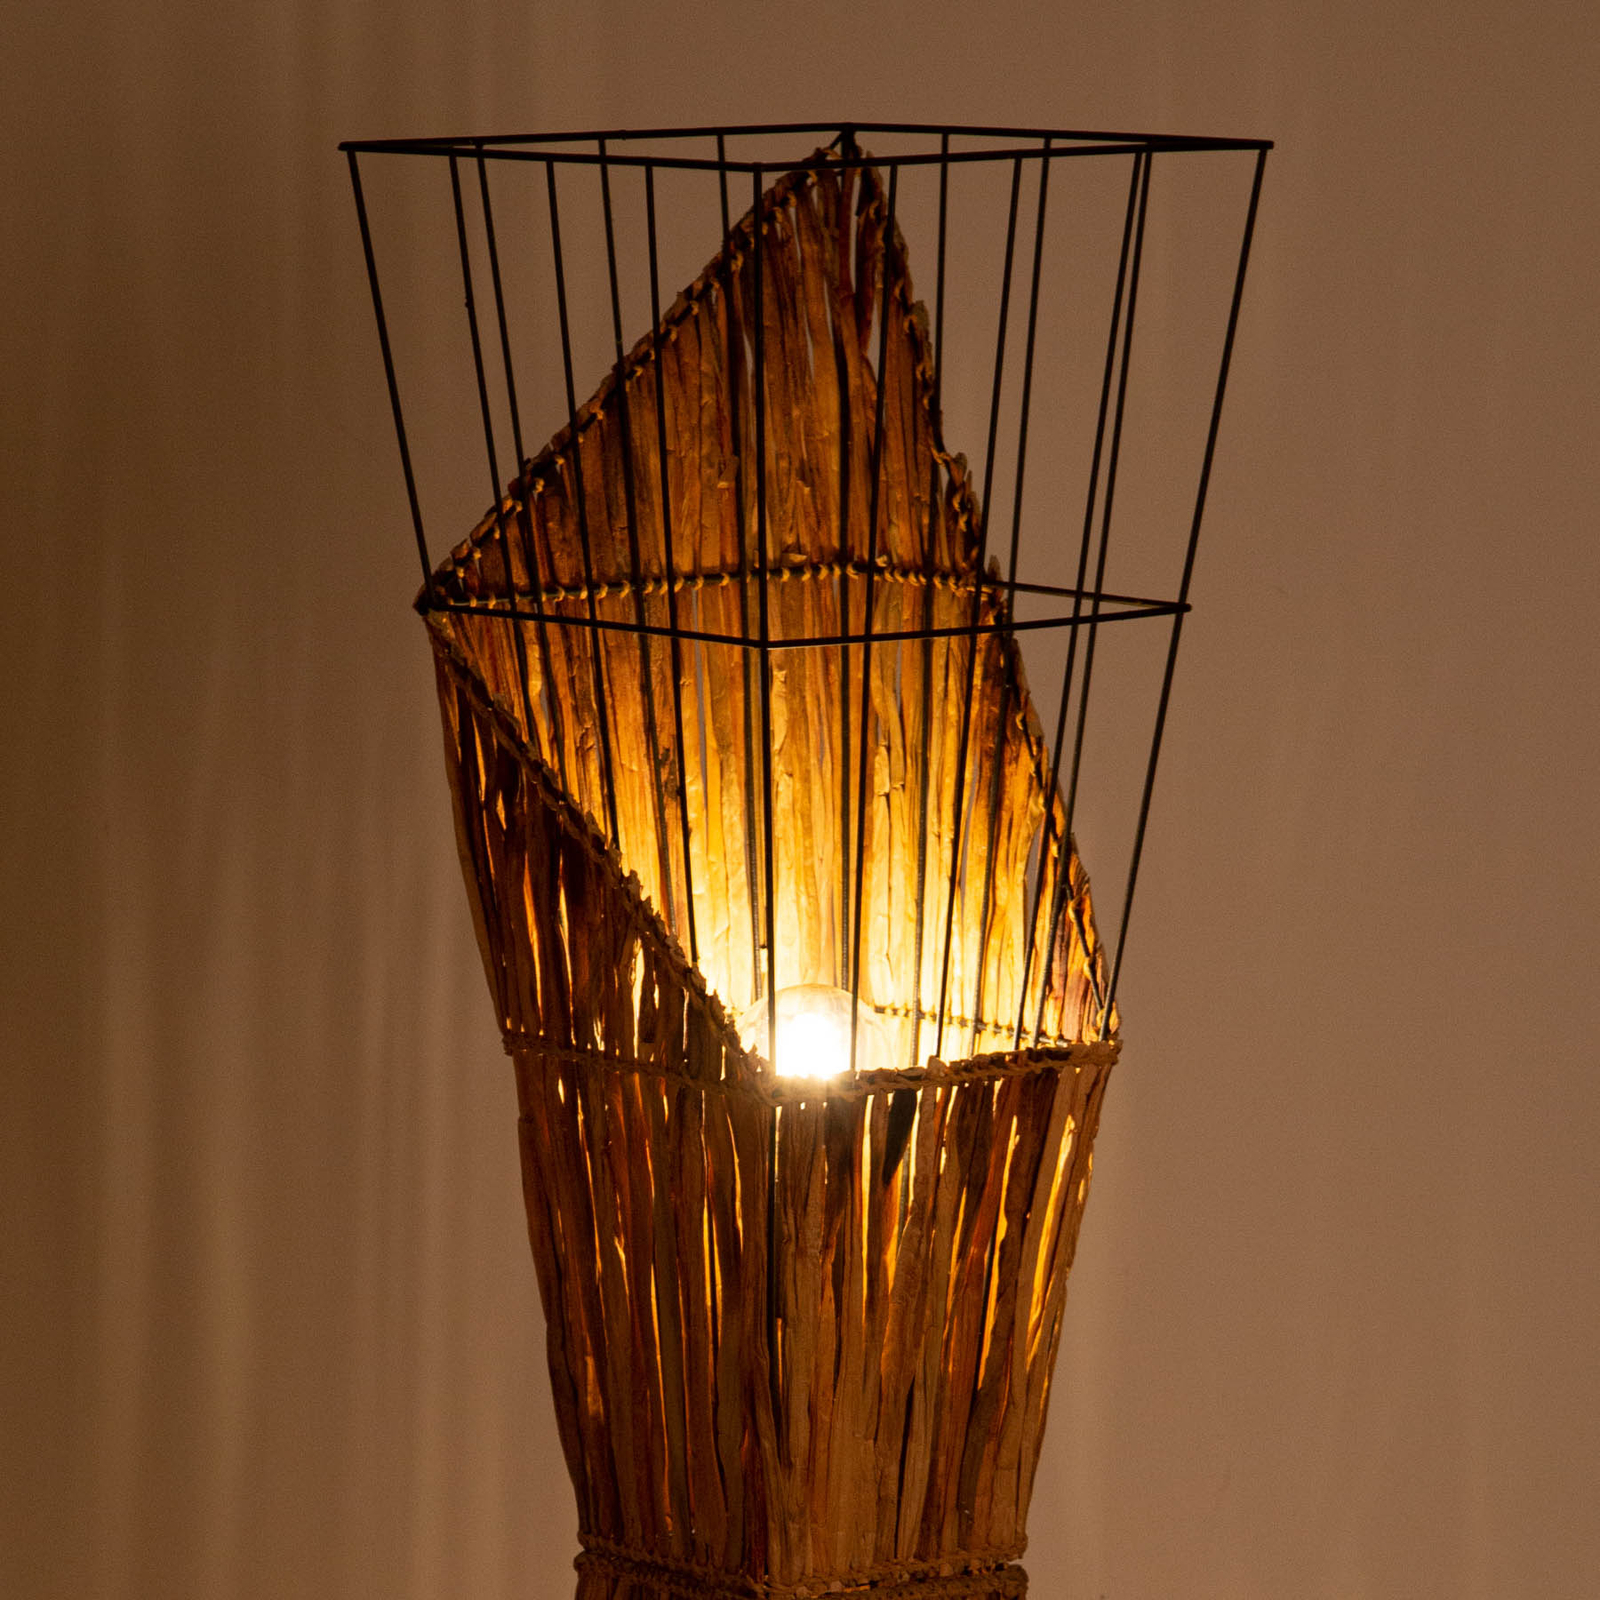 Rinca floor lamp, wire shade with grass weave